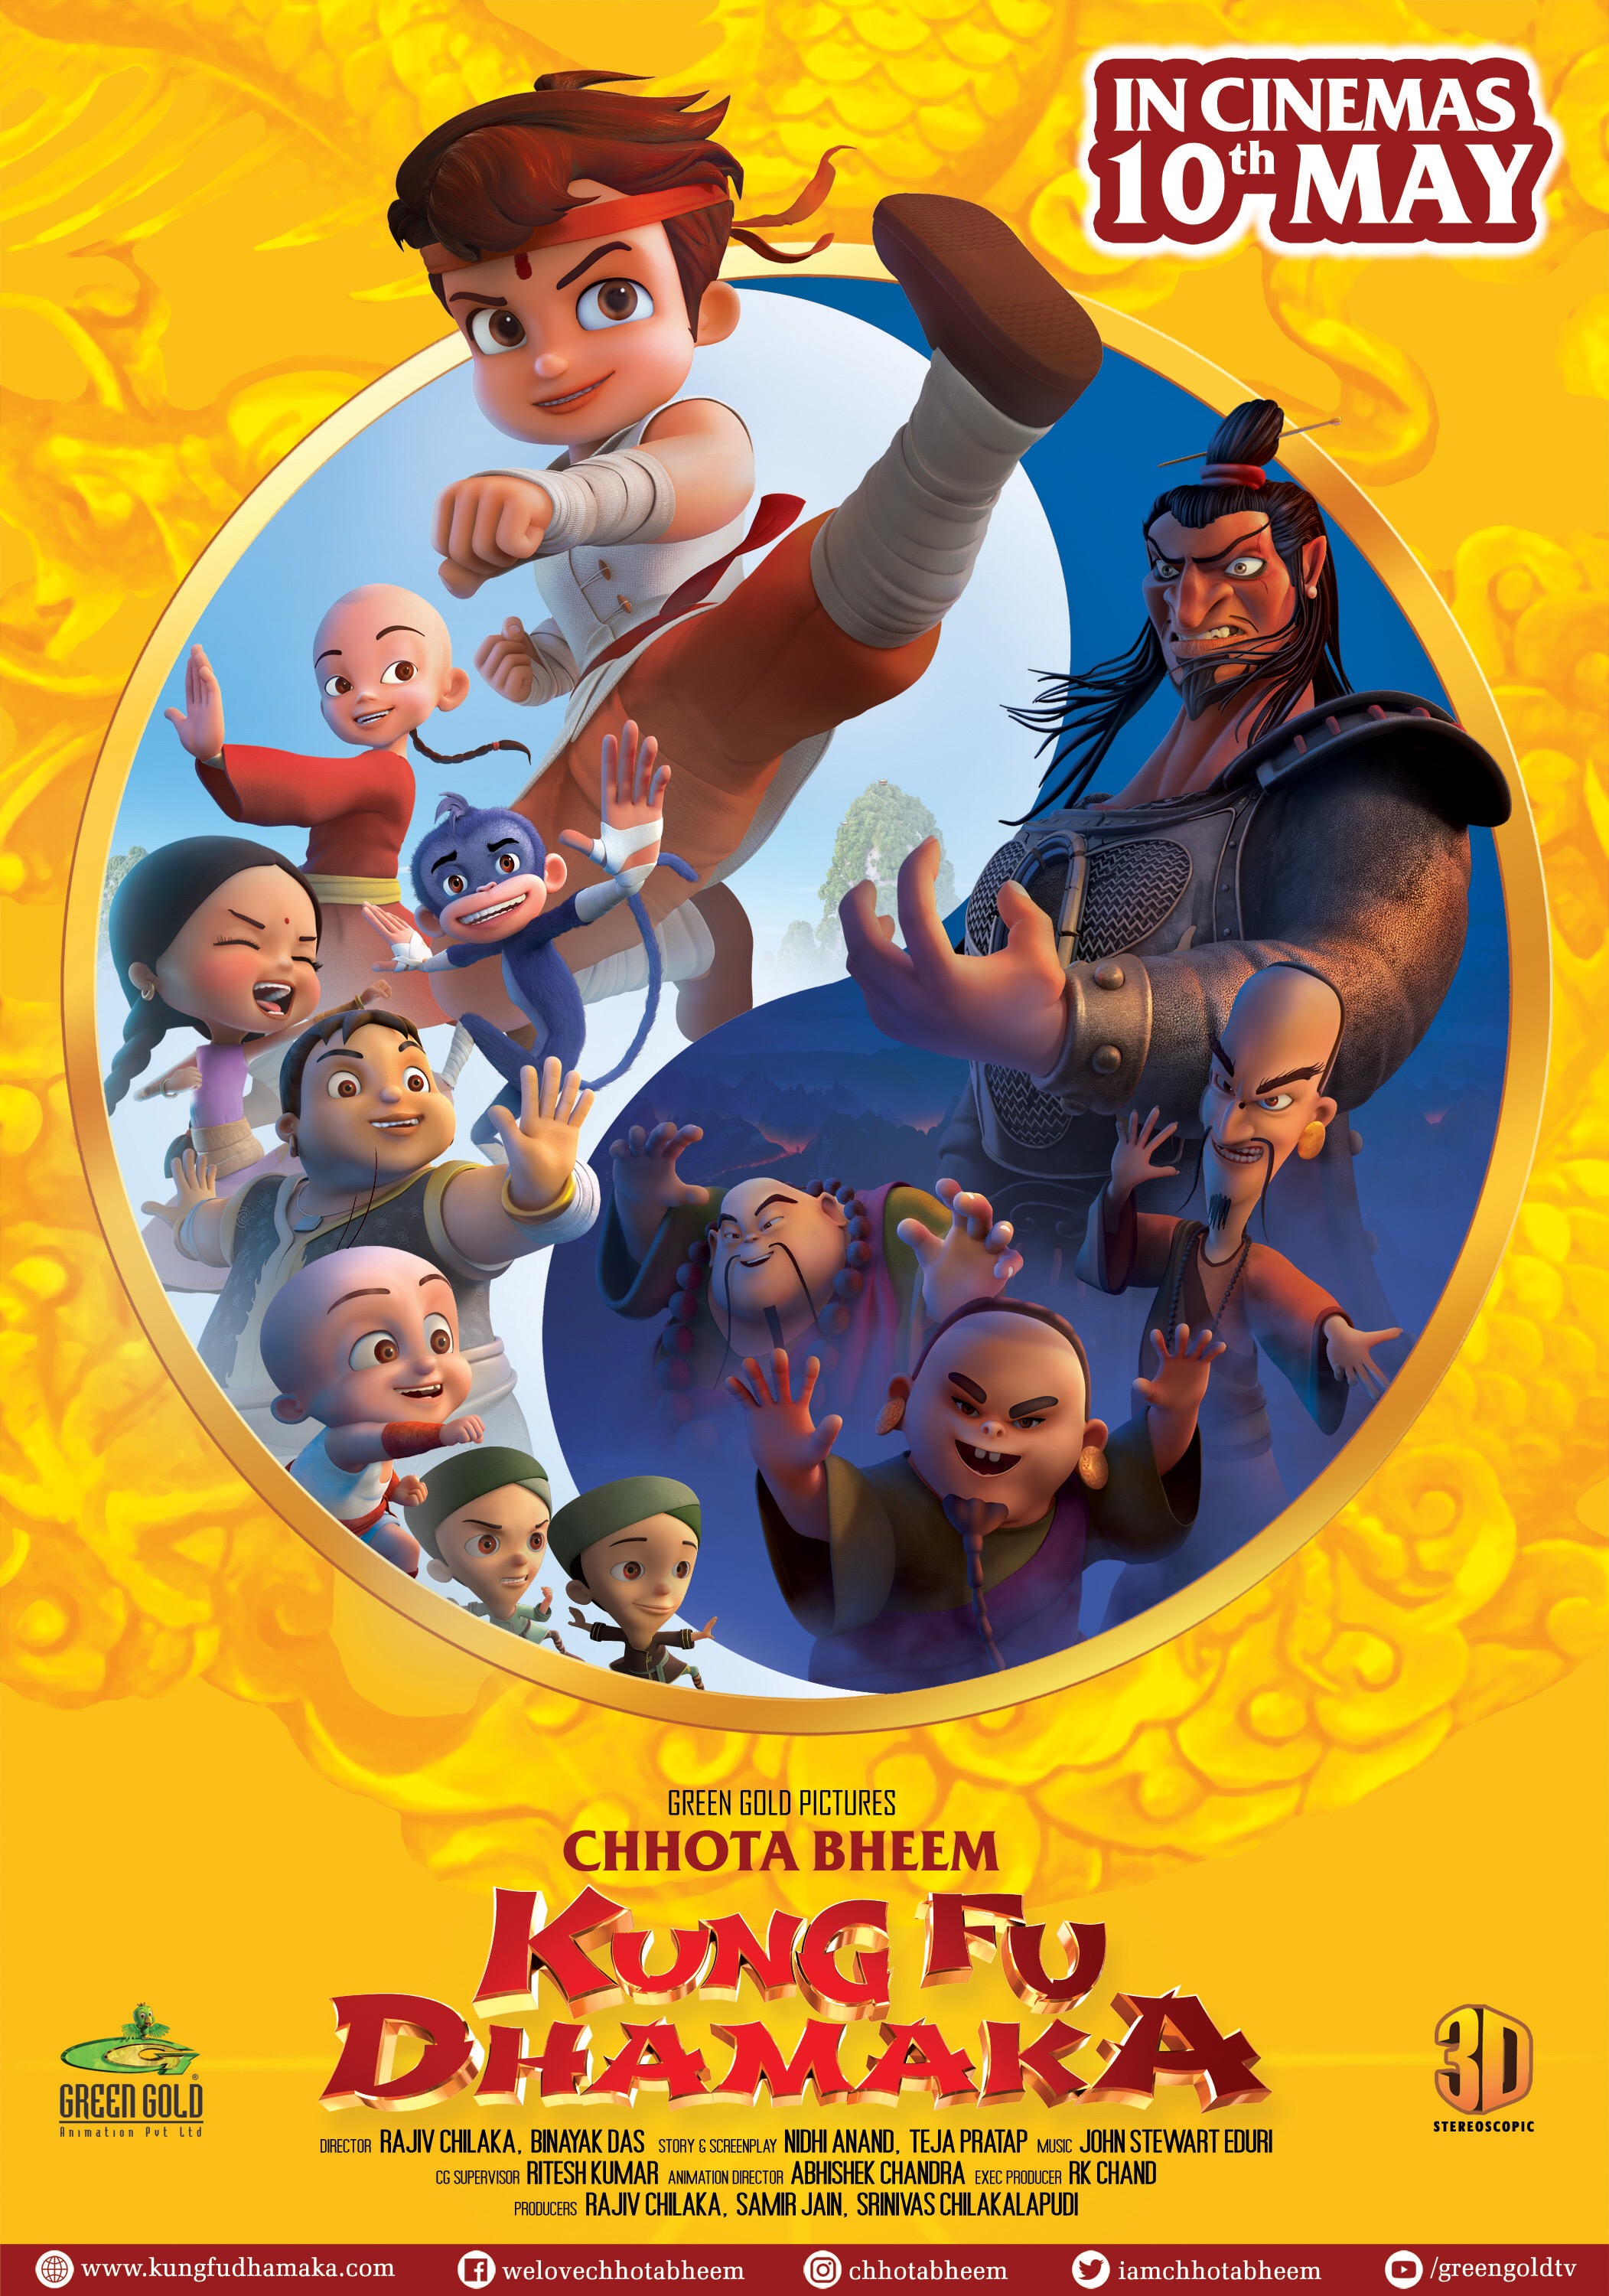 Chhota Bheem: Kung Fu Dhamaka 3D unveils new trailer and poster |   – The latest movies, interviews in Bollywood